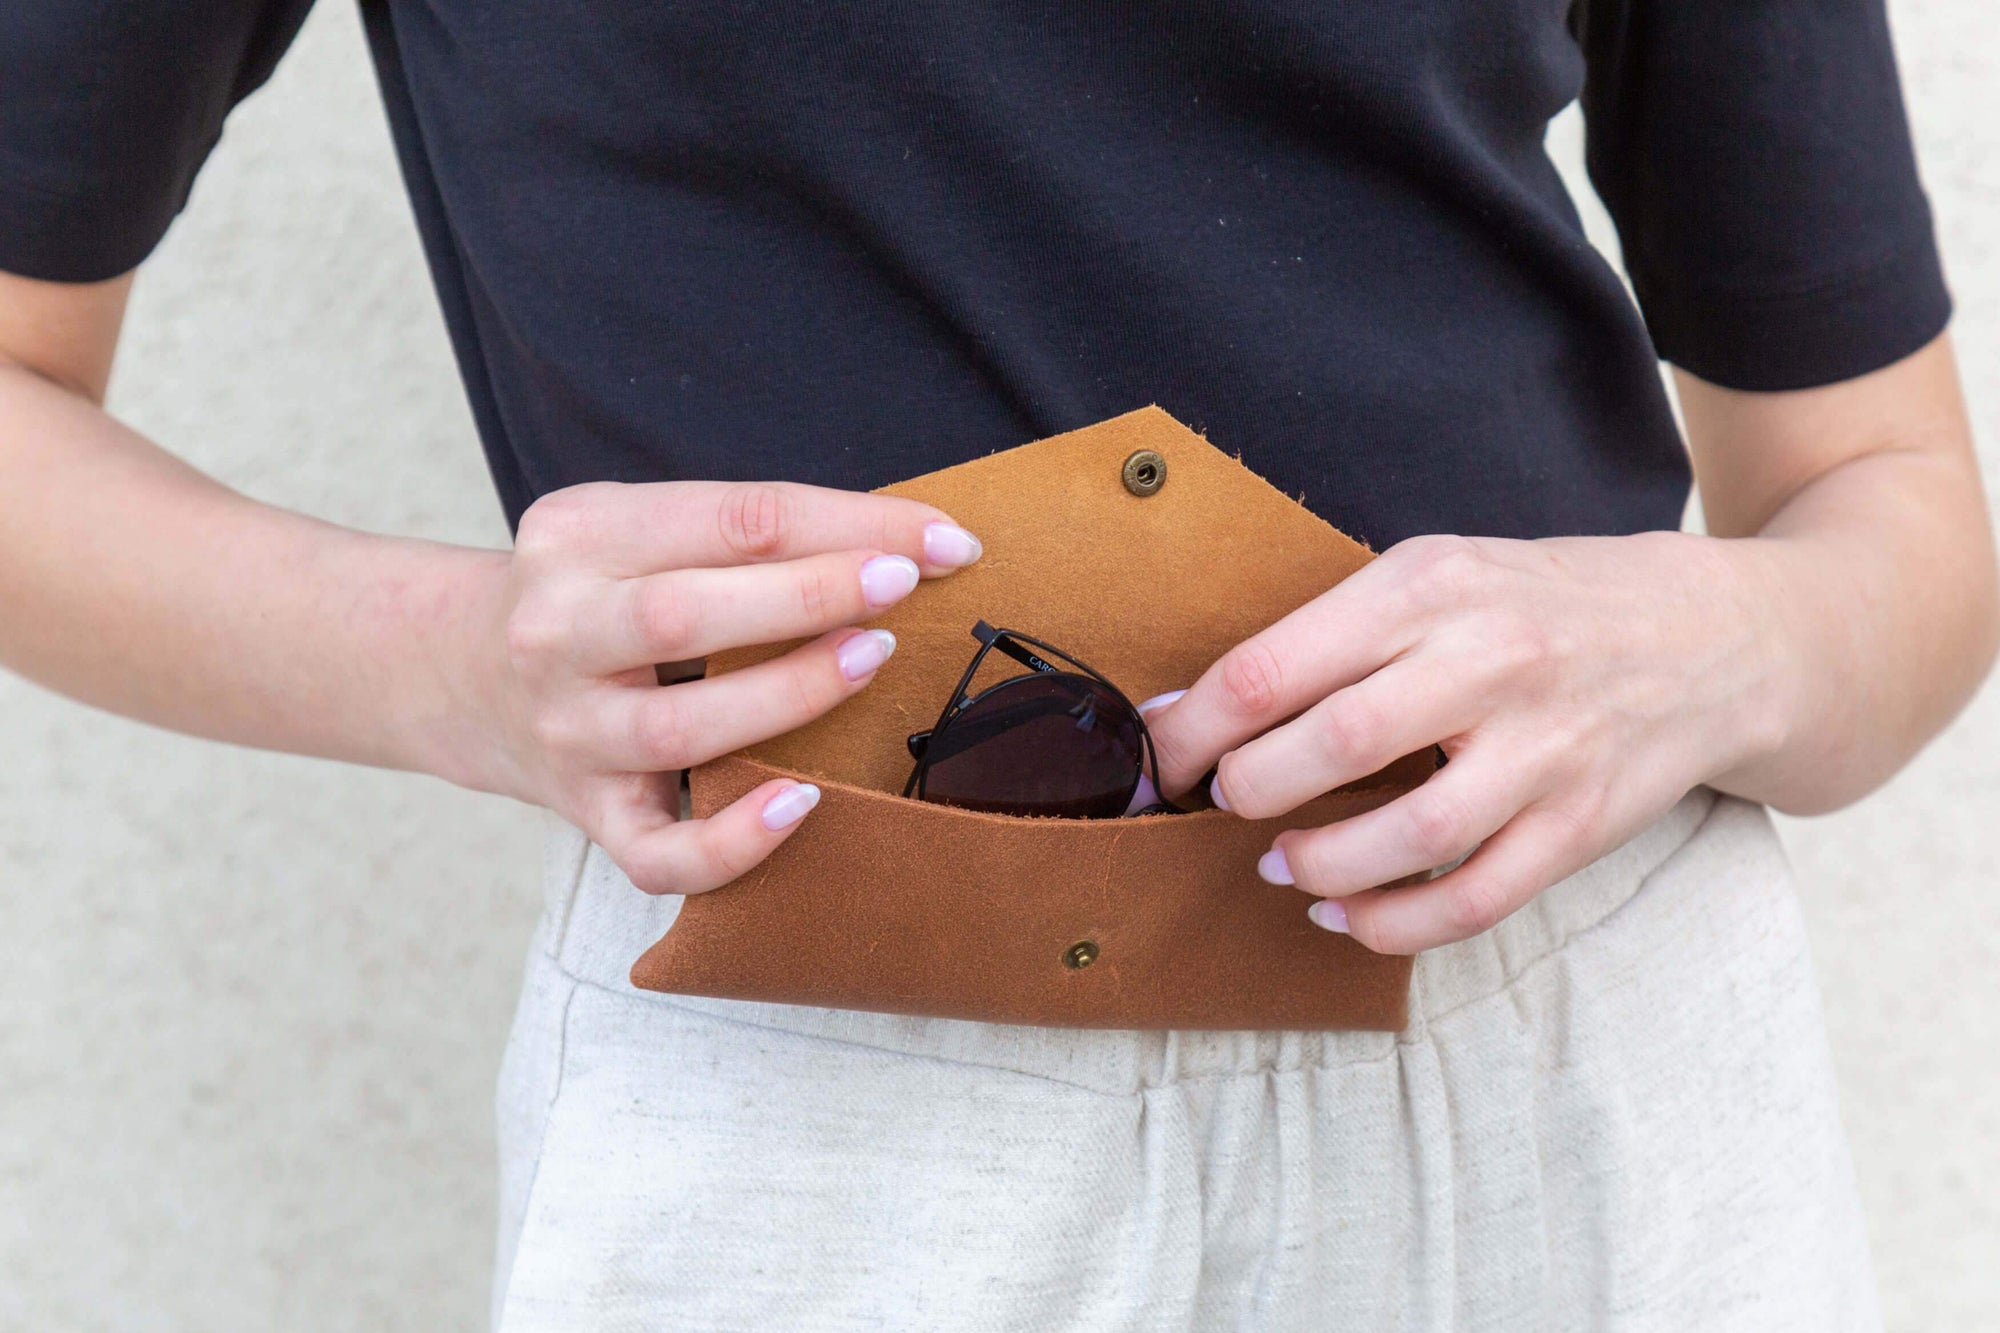 leather sunglasses case, leather pouch, leather envelope pouch, small gift, accessories, brown leather case, pencils case, handmade leather, ||Brown||